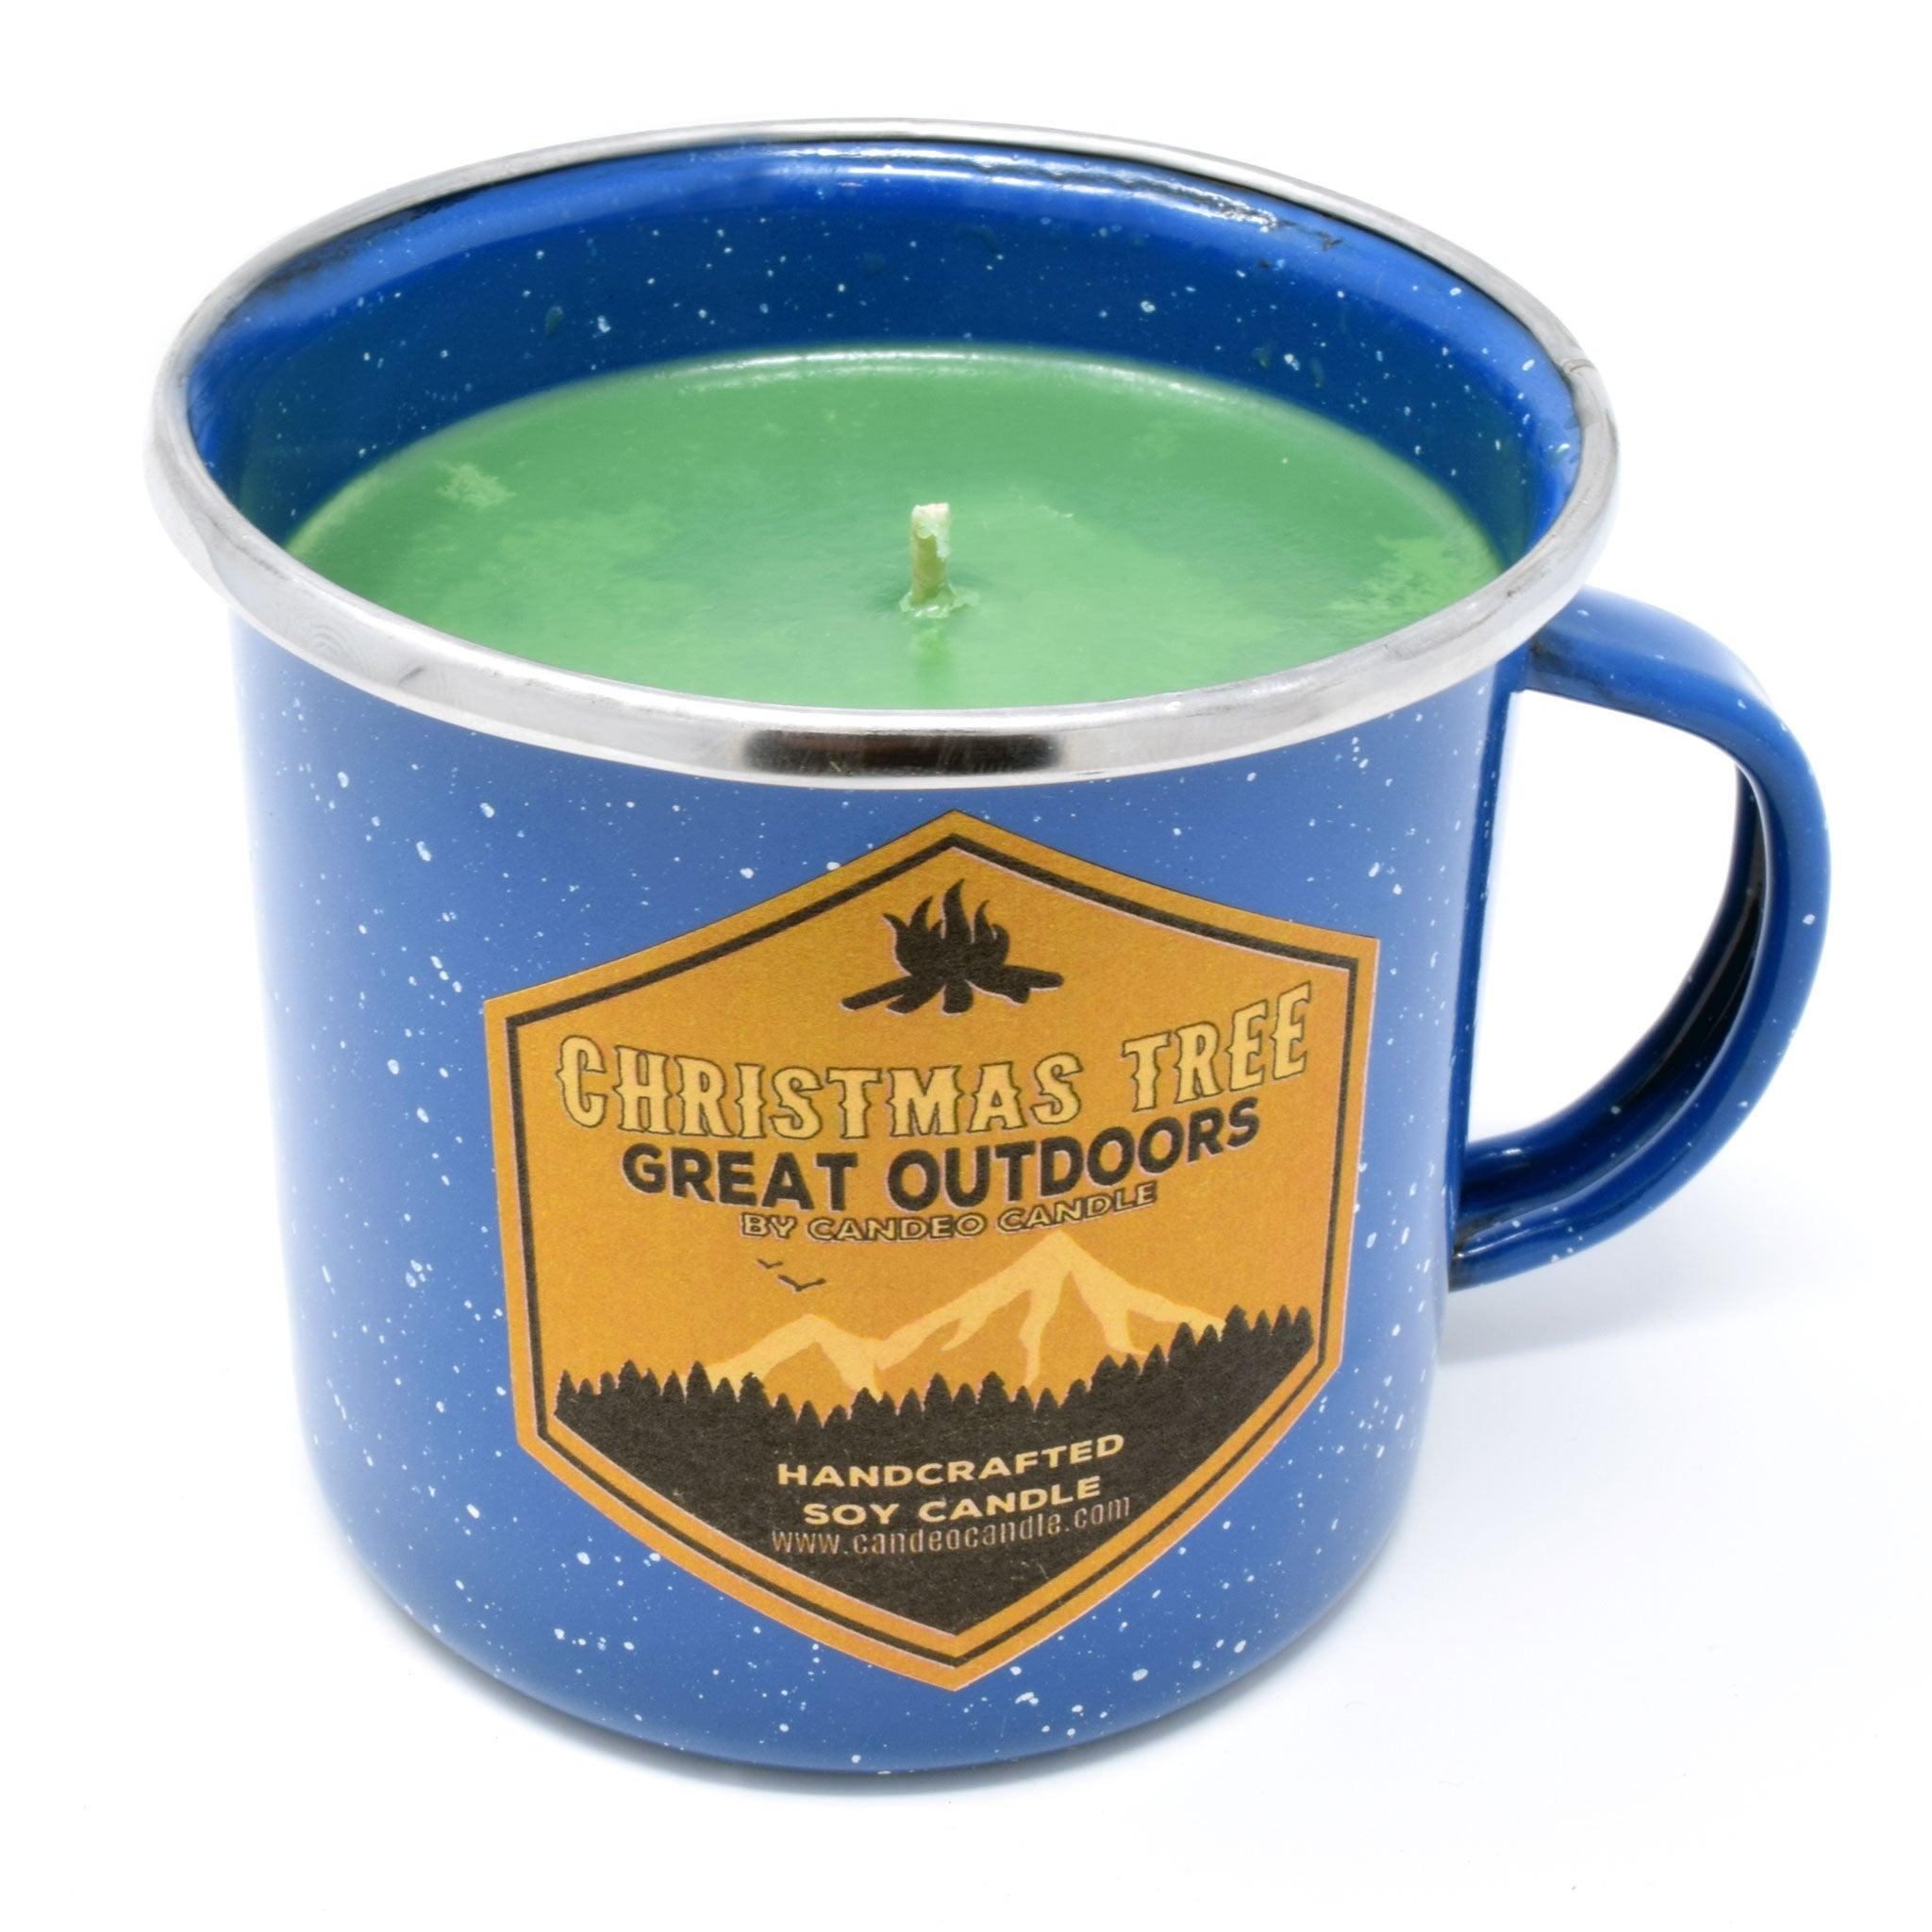 Christmas Tree, Soy Candle in Enamel Camping Mug, 10oz - Candeo Candle